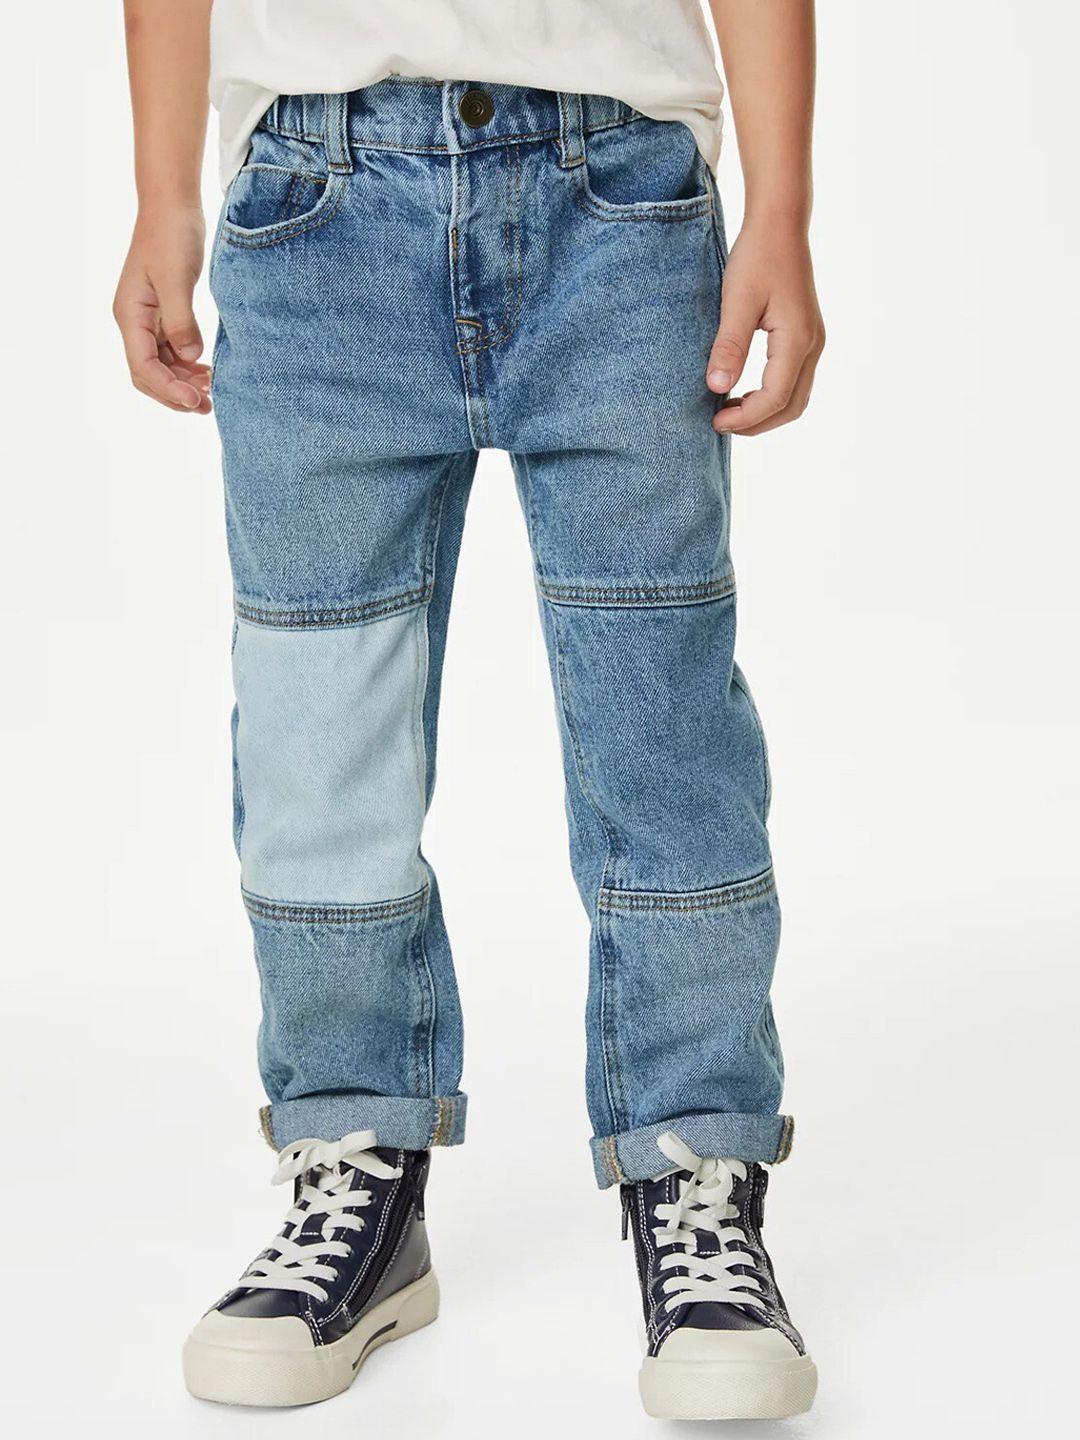 marks-&-spencer-boys-heavy-fade-mid-rise-cleanlook-pure-cotton-jeans